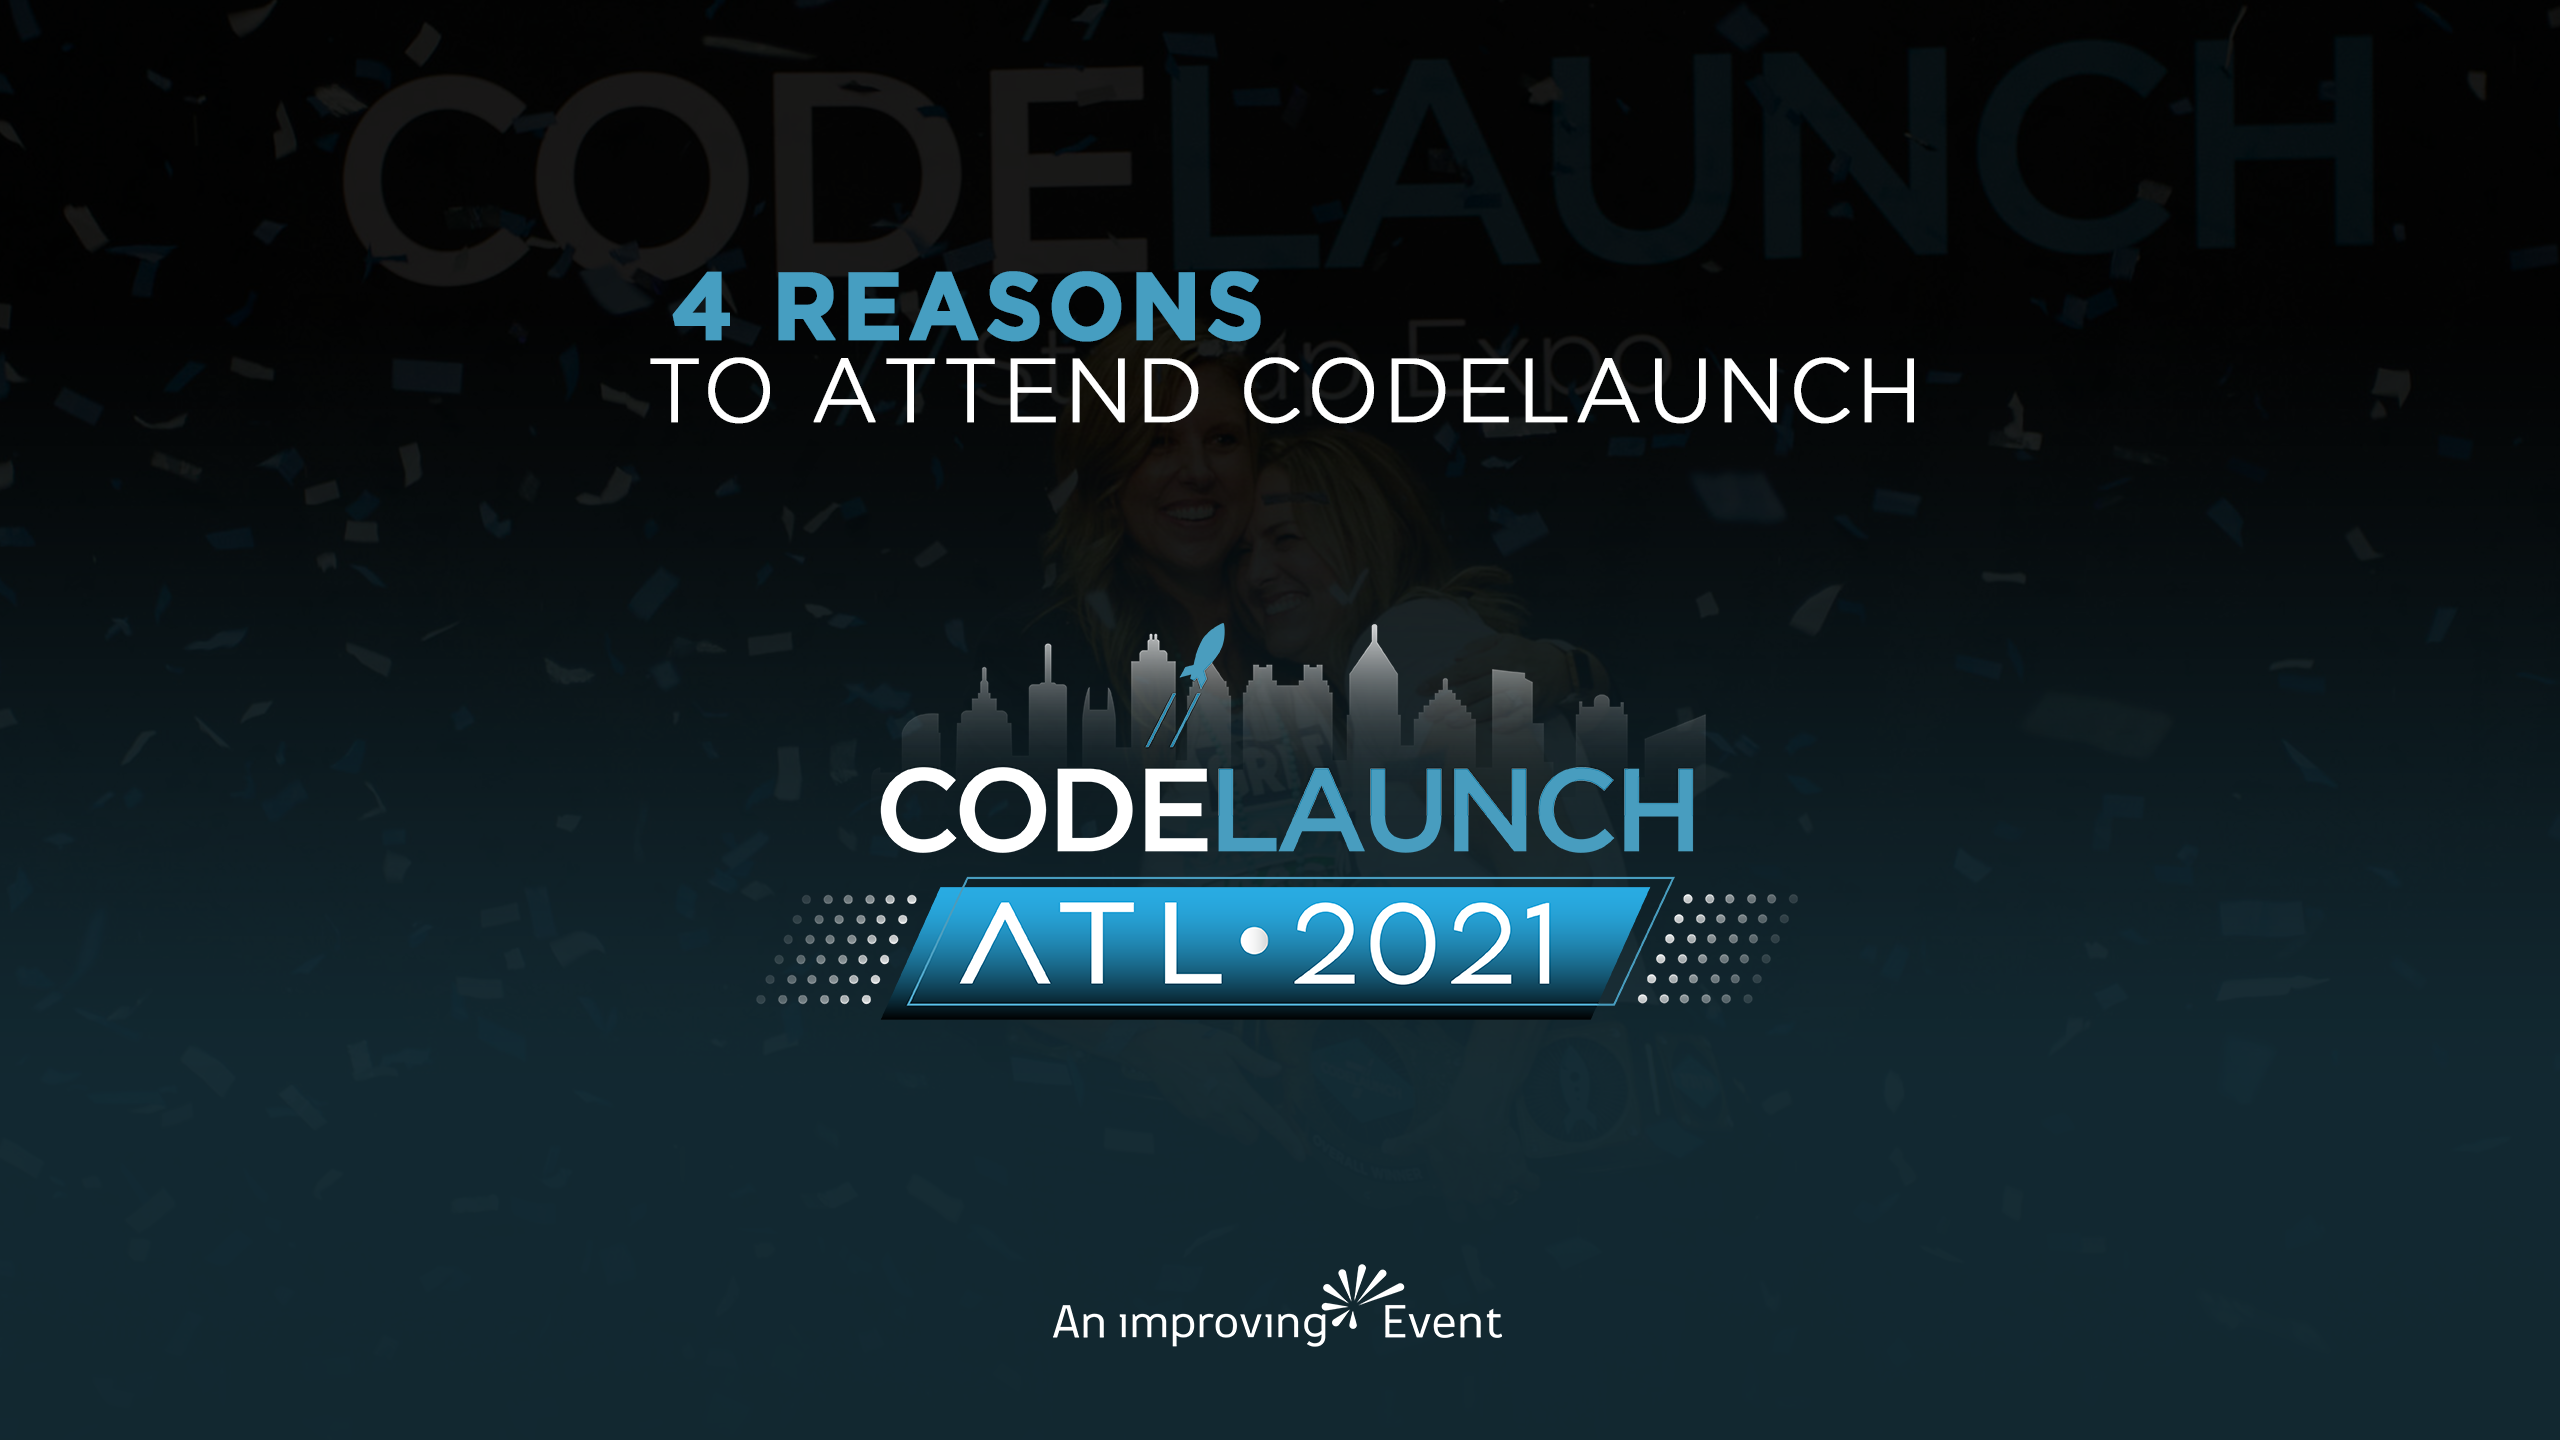 4 Reasons to Attend CodeLaunch ATL 2021